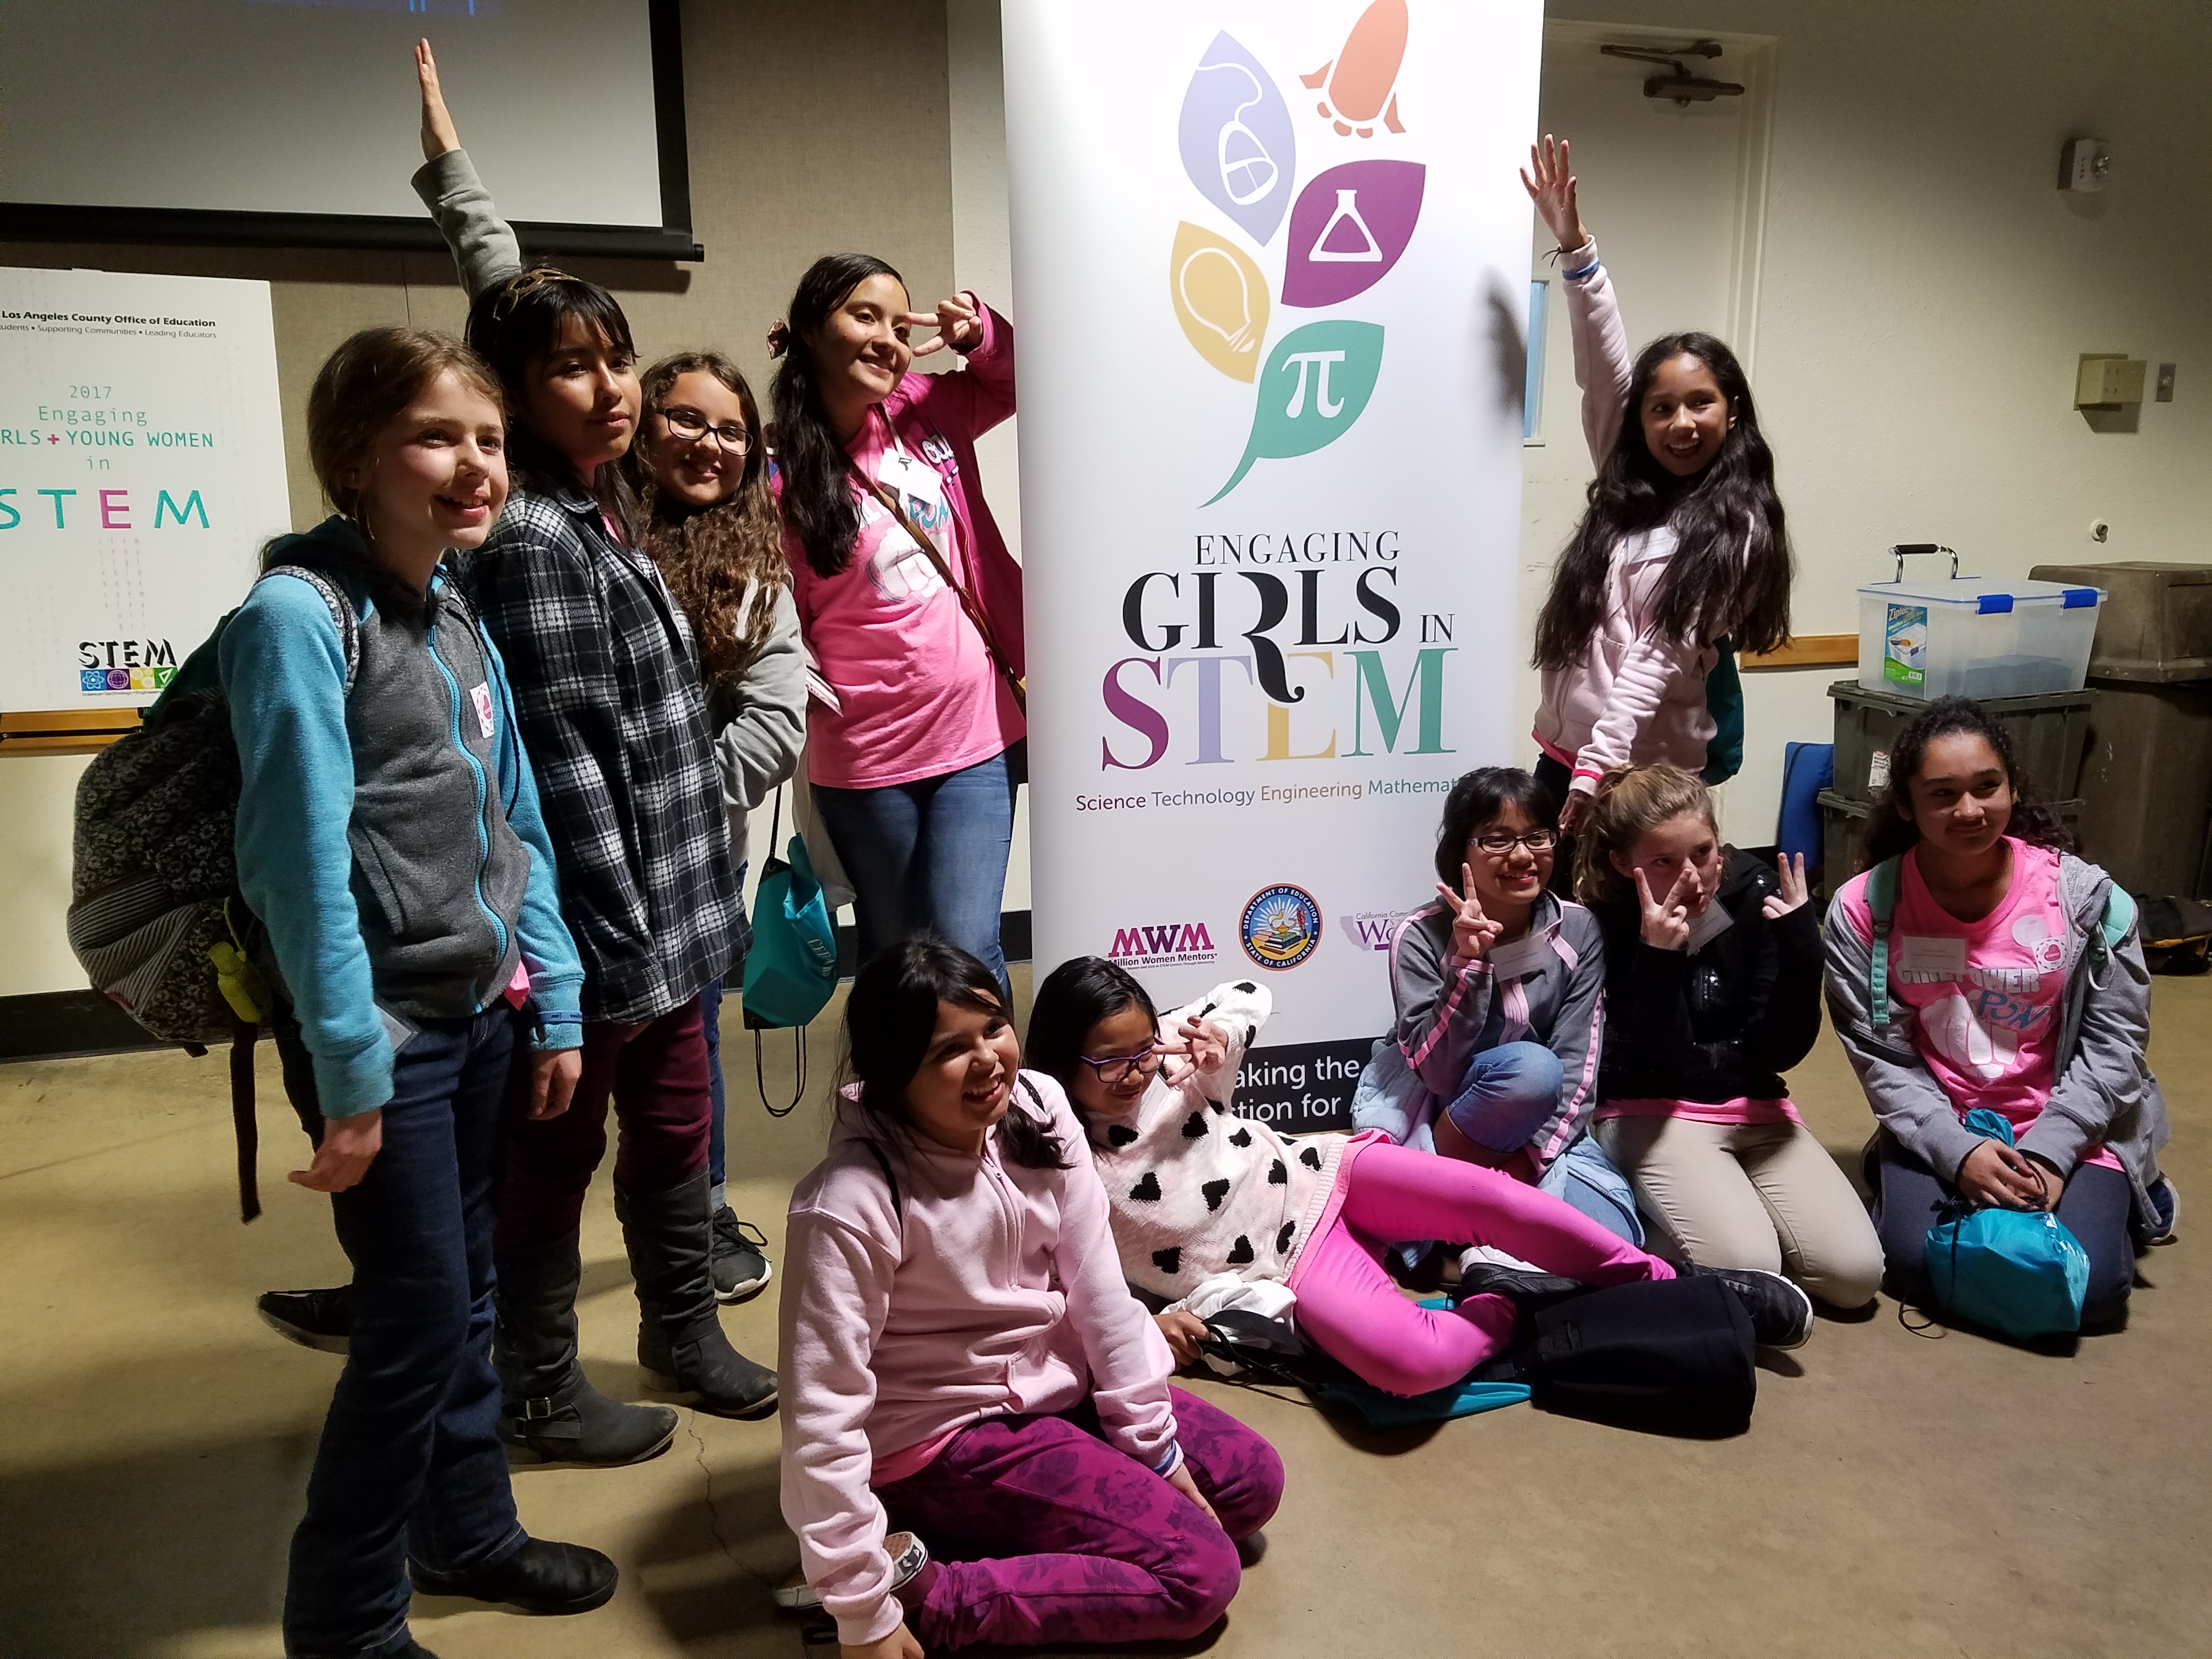 Los Angeles Country girls attending STEM Town Hall meeting